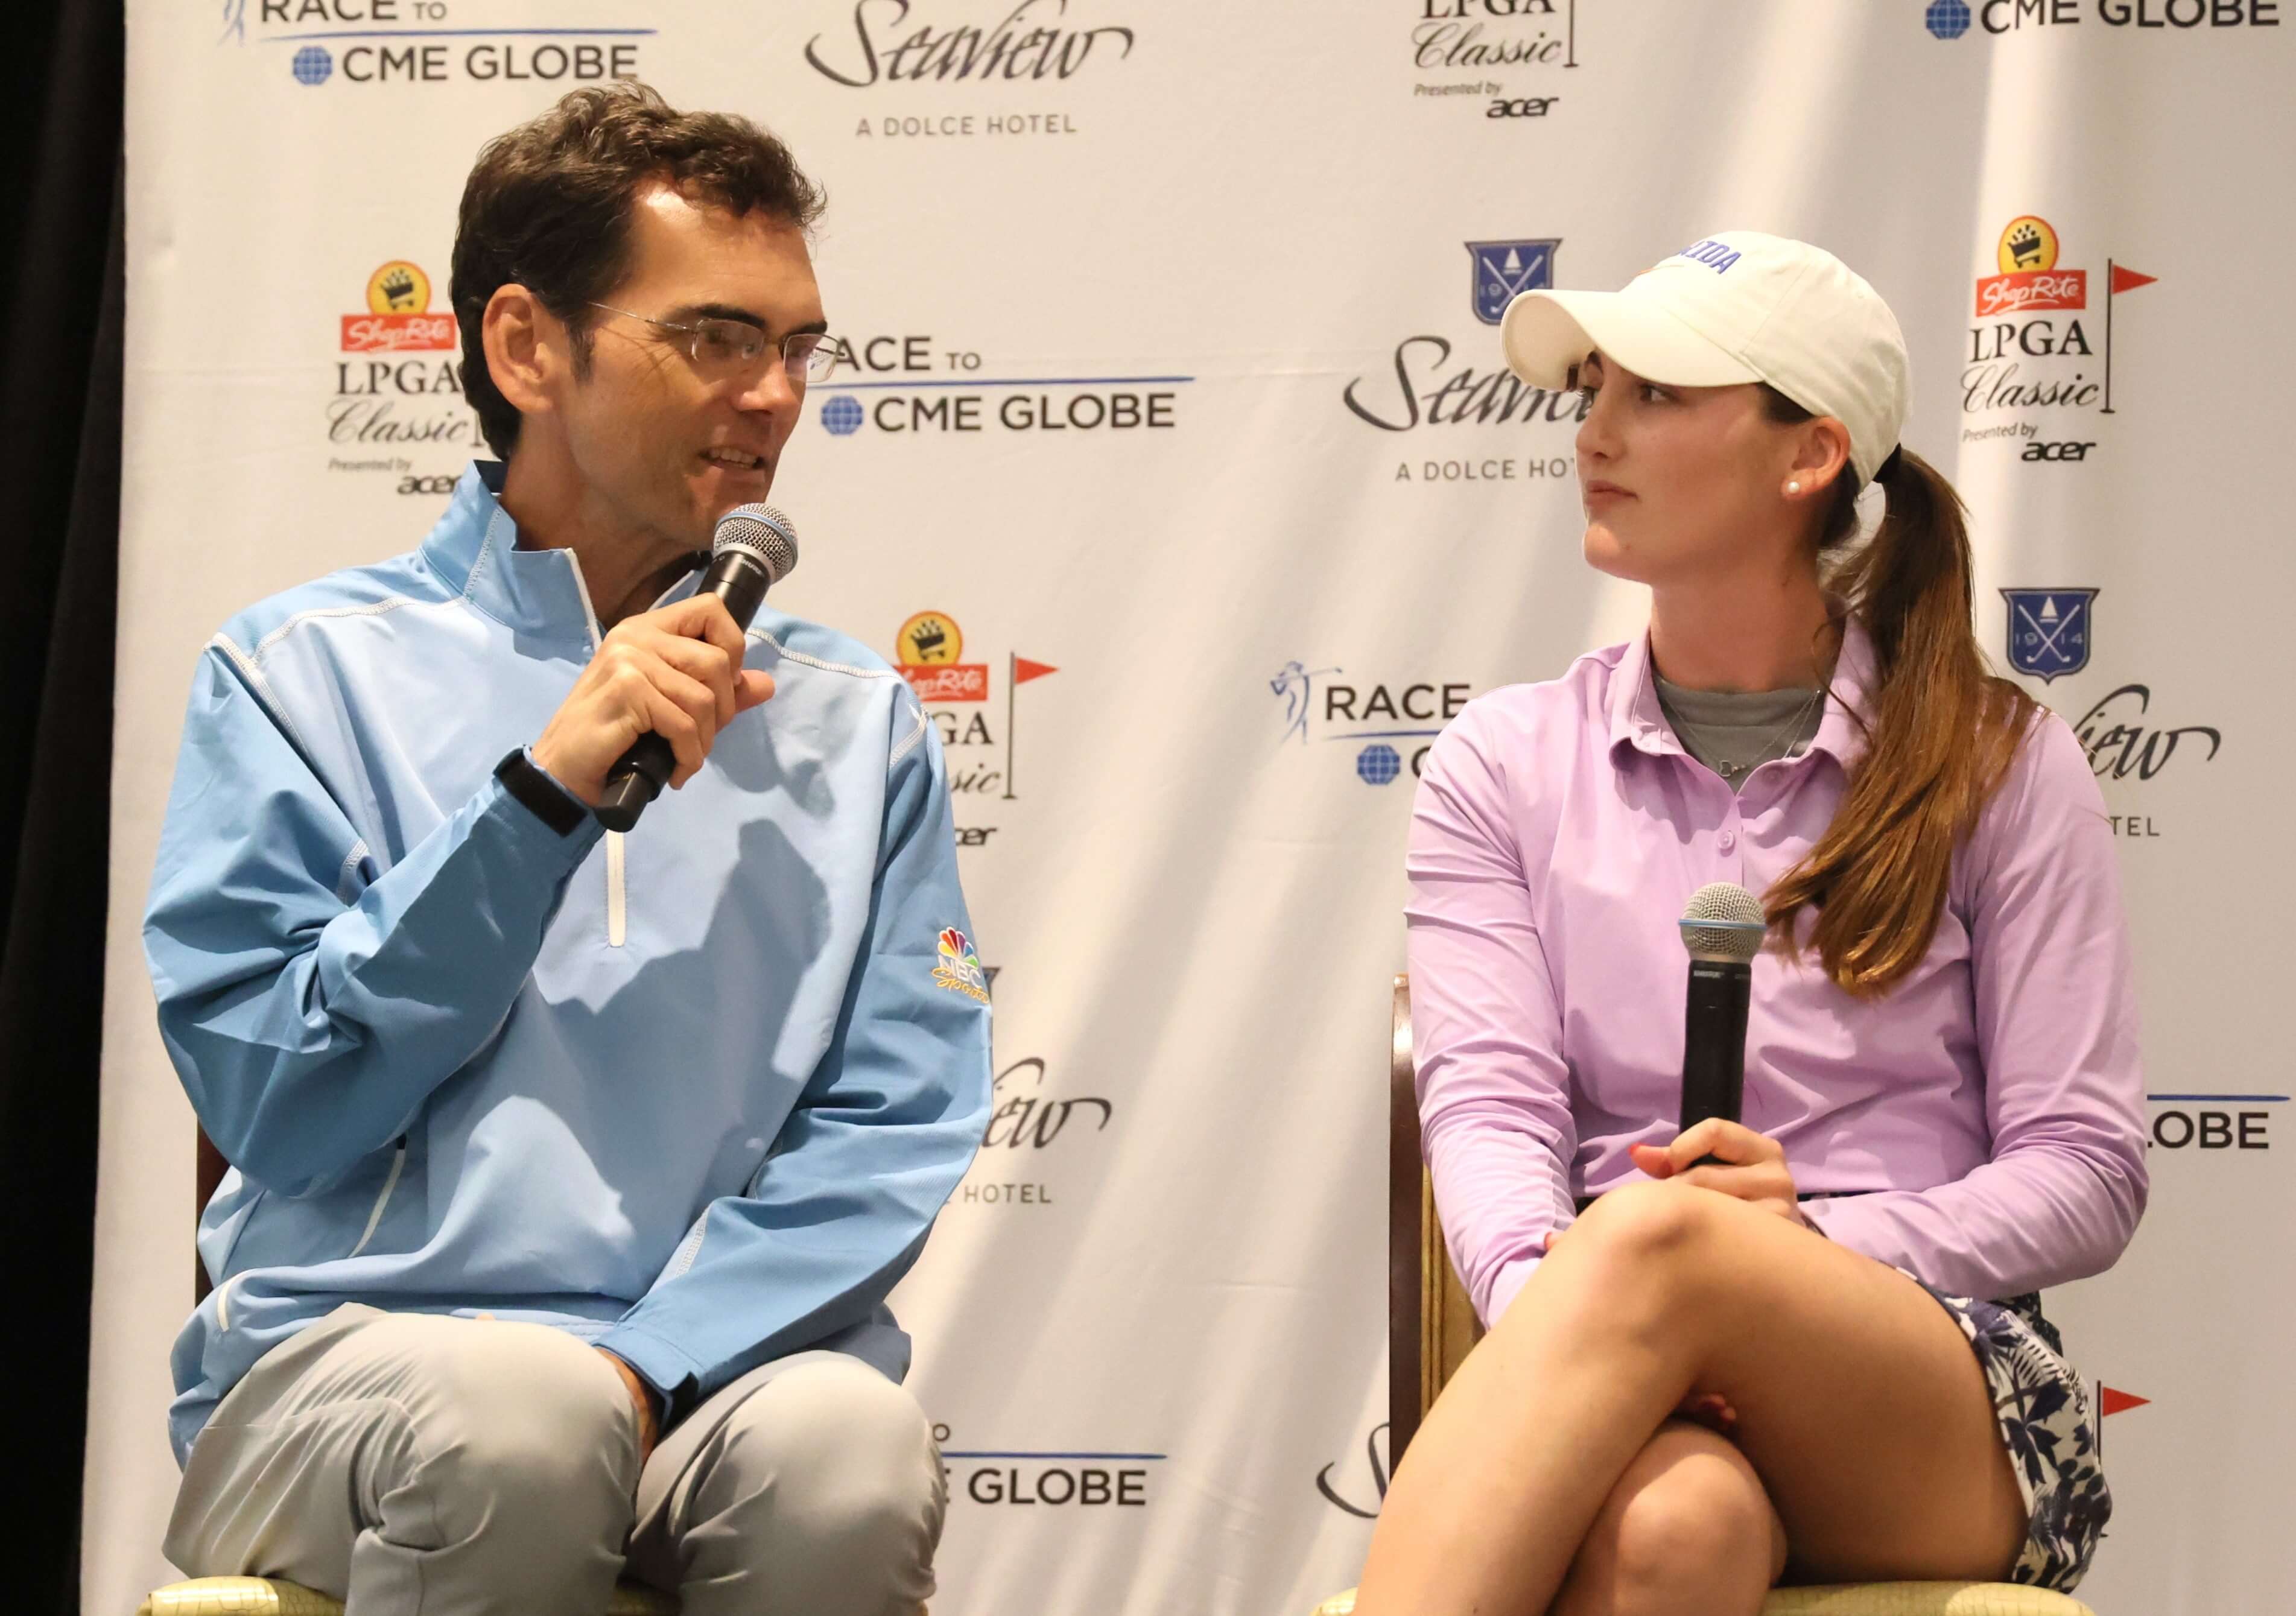 Major Champions, Past Champions and World's Top-Ranked Players Headline Early Commitments for the ShopRite LPGA Classic Presented by Acer, June 7-9 in Galloway, N.J.